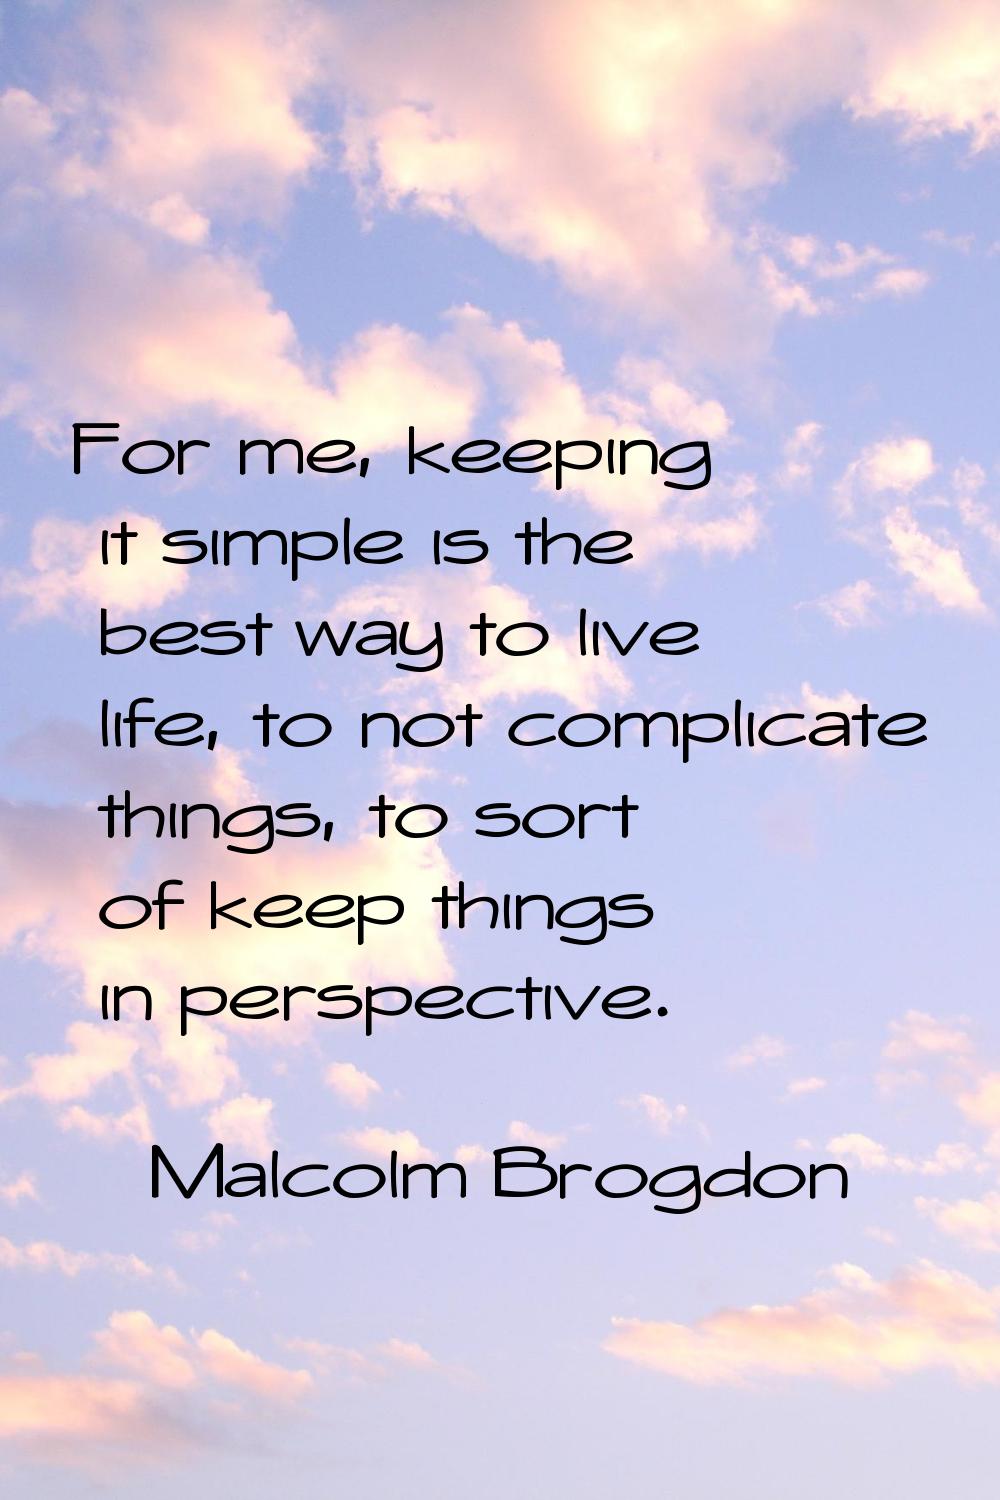 For me, keeping it simple is the best way to live life, to not complicate things, to sort of keep t